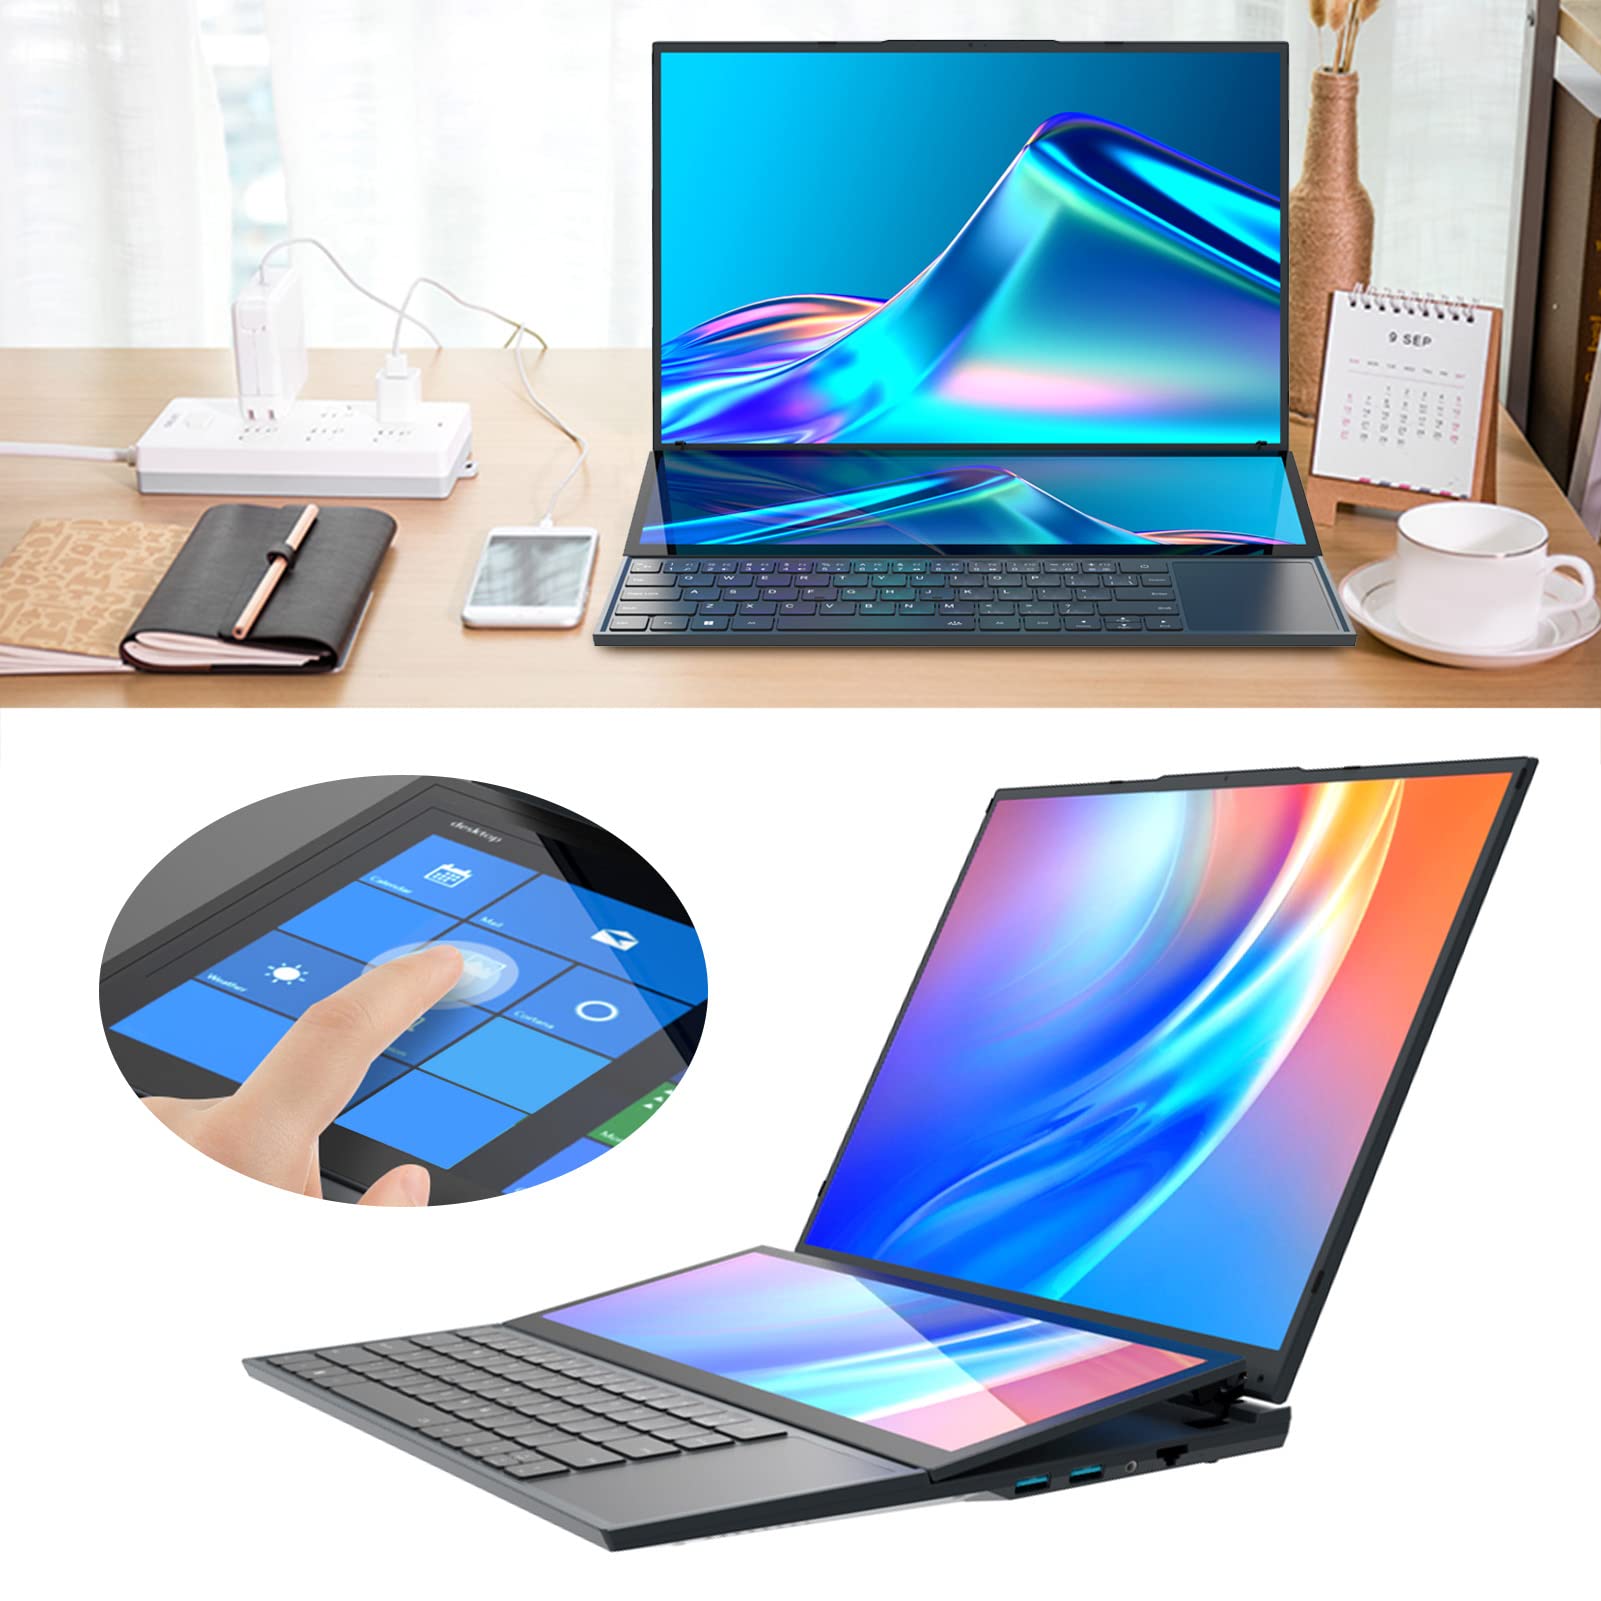 GOWENIC 16inch HD Main Screen and 14inch FHD Touch Secondary Screen, Gaming Laptop for Win 10 11 for Intel for Core I7 CPU, 32GB RAM 1TB SSD, RJ45 Gigabit Network Card (US)